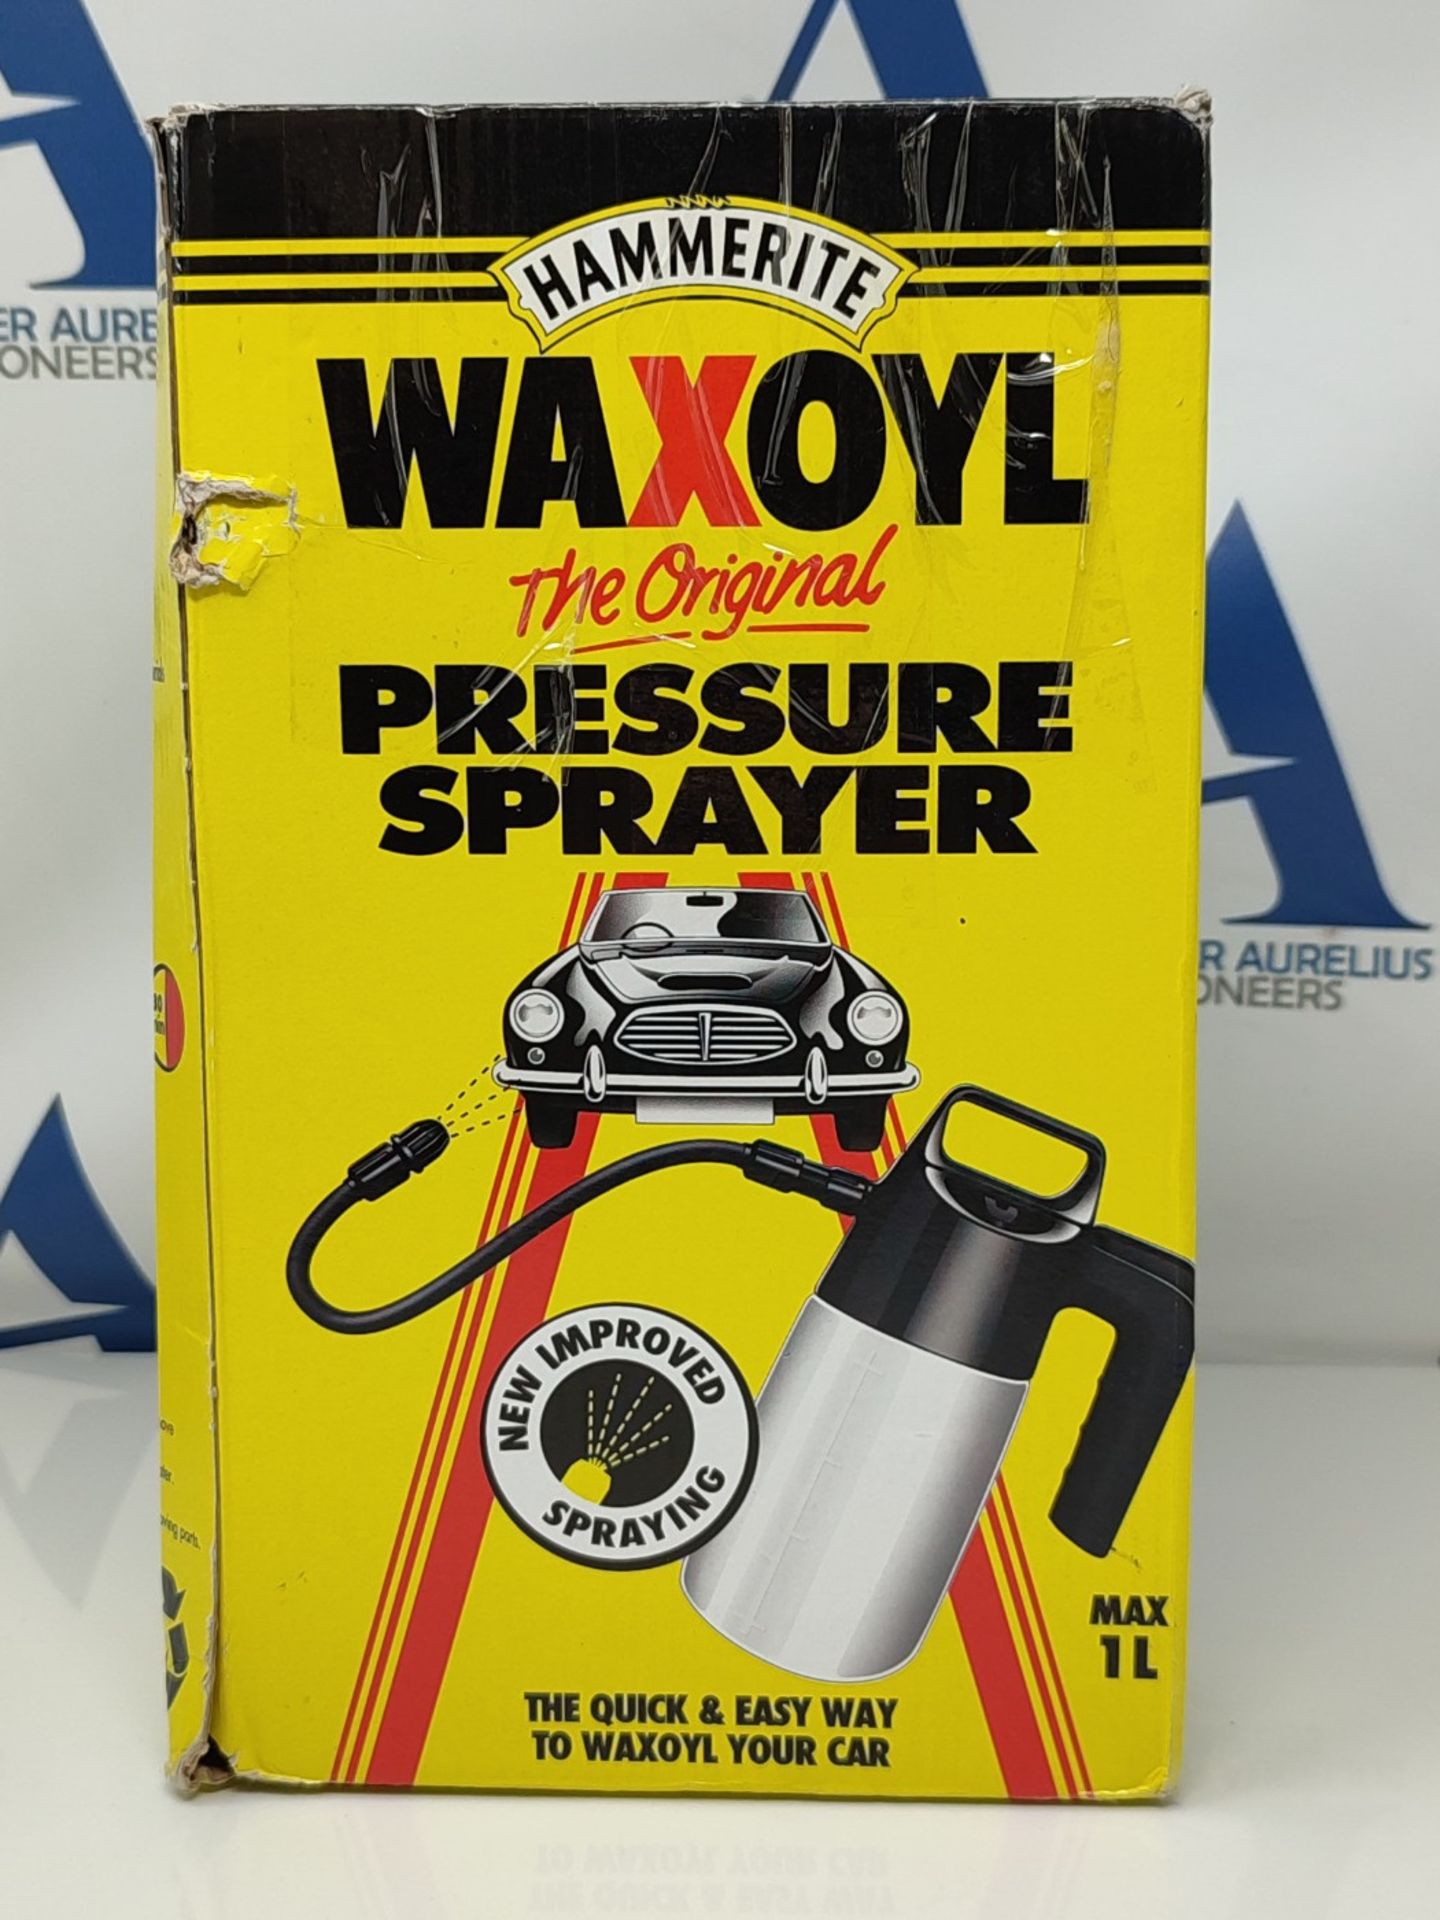 Waxoyl High Pressure Sprayer Kit with Extension Hose and Spray Nozzle for Car Wax Spra - Image 2 of 3